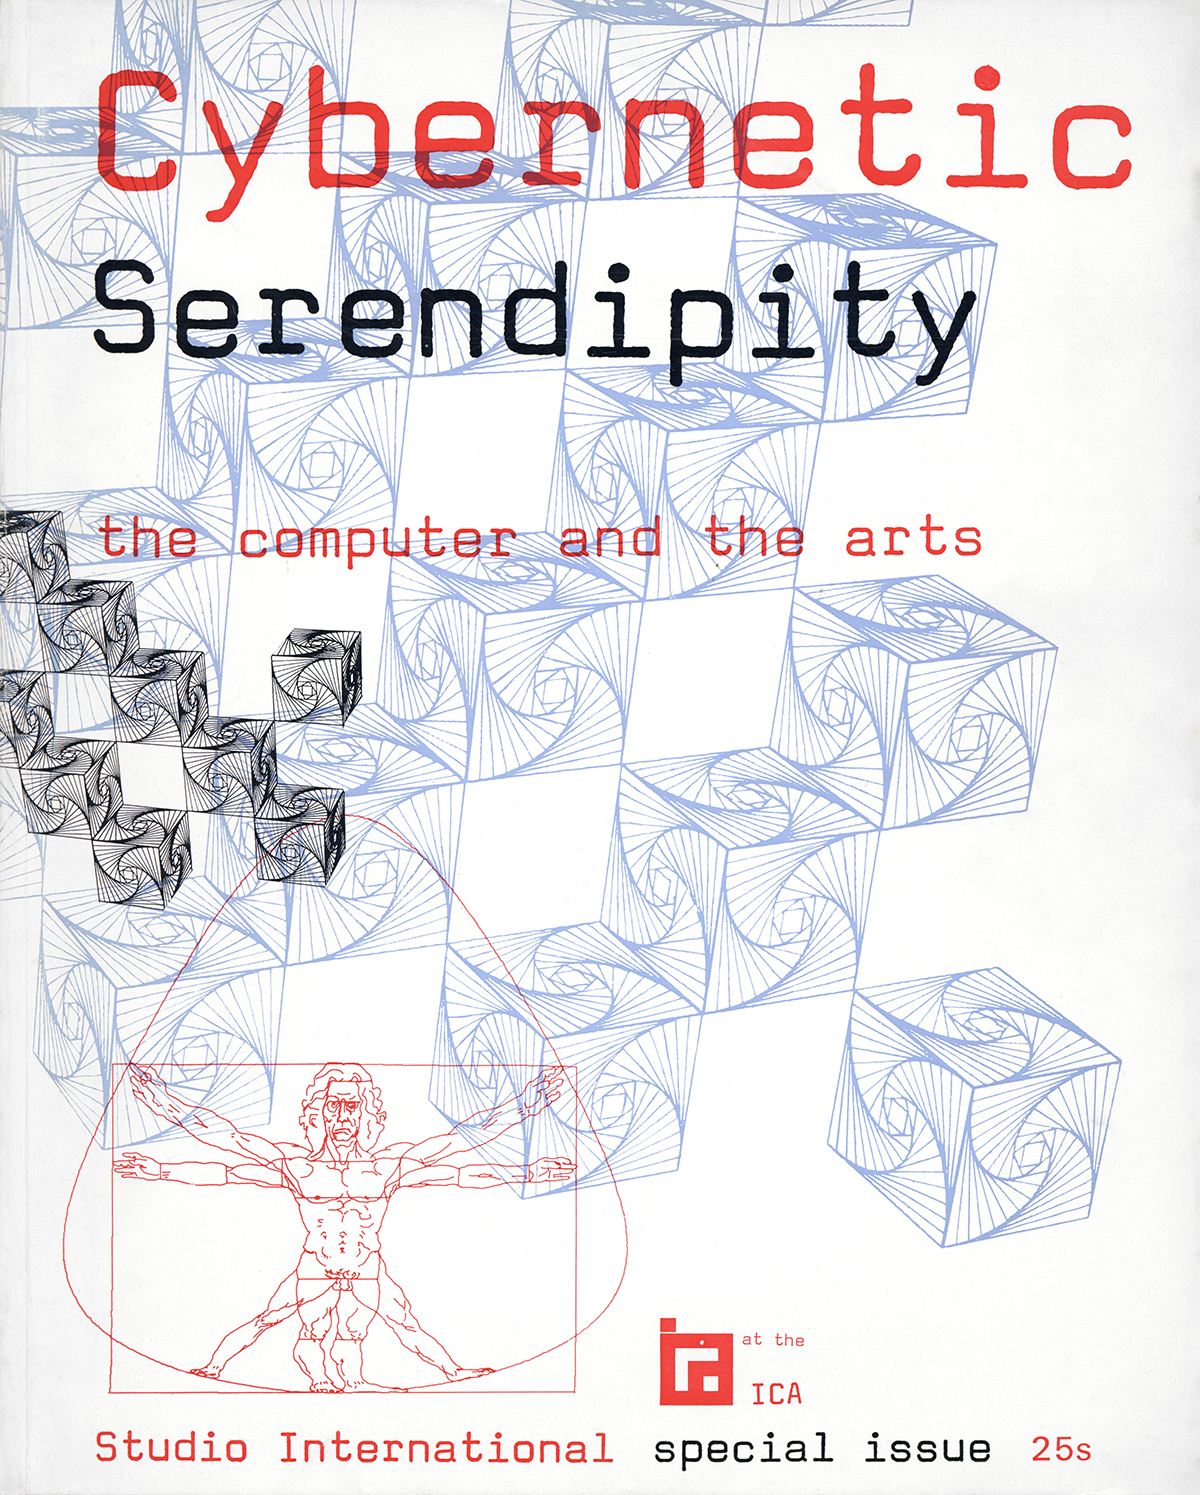 Reichardt_Jasia_ed_Cybernetic_Serendipidity_The_Computer_and_the_Arts.jpg